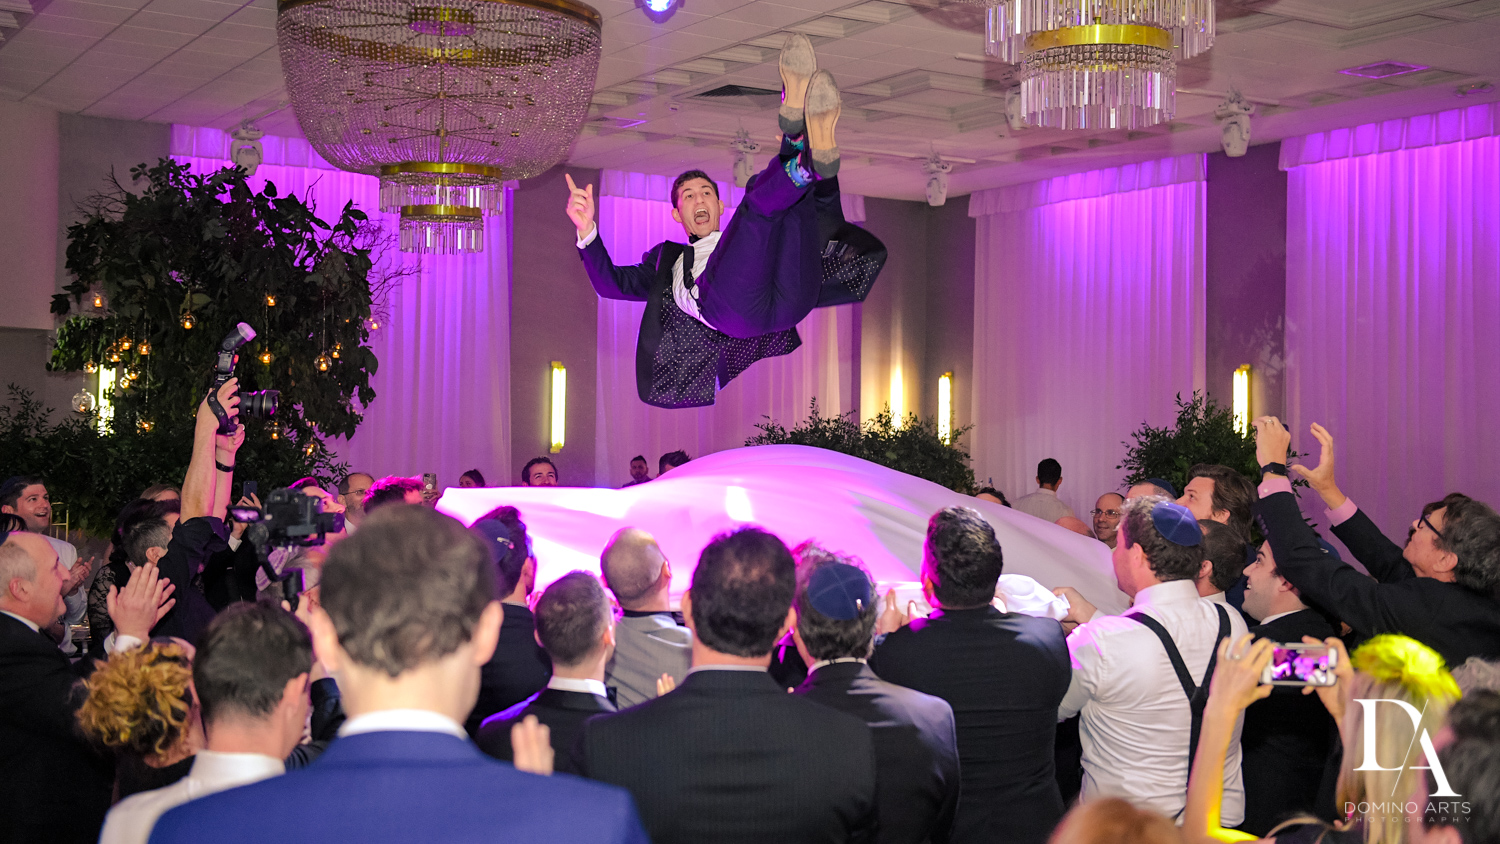 crazy fun party pictures at Classic Miami Beach Wedding at Temple Emanu-El and Emanuel Luxury Venue by Domino Arts Photography